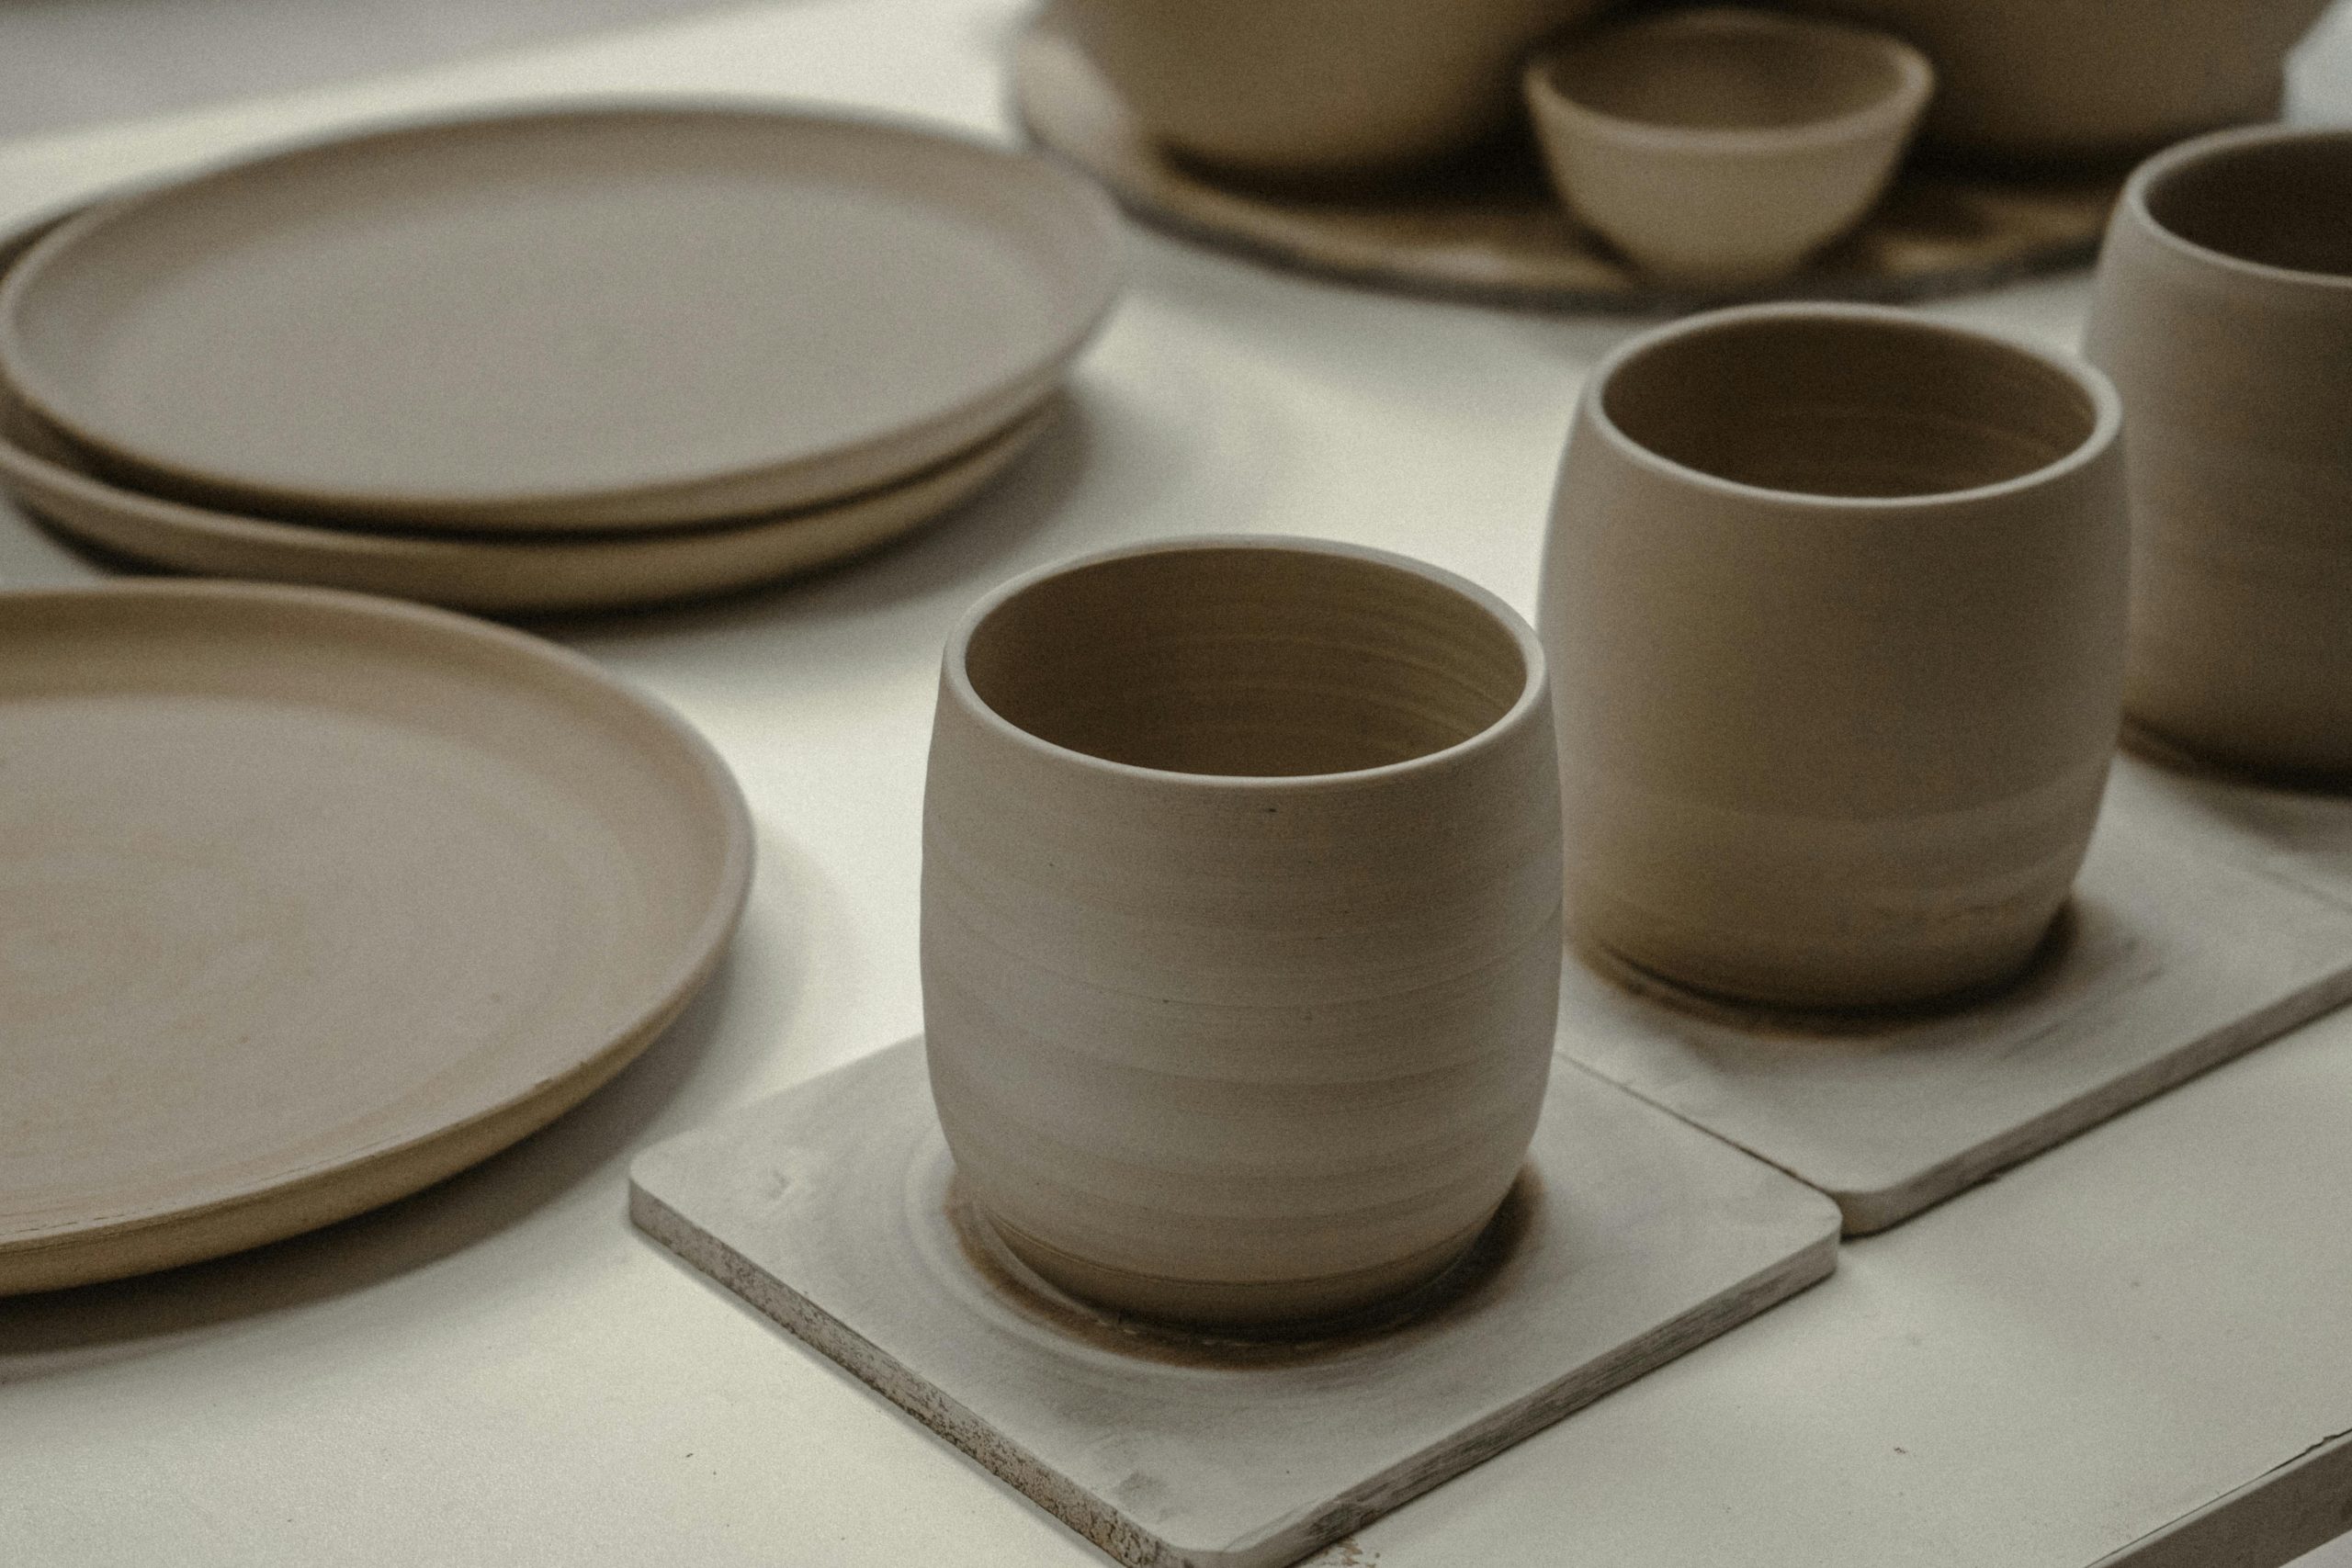 Greenware thrown on pottery courses